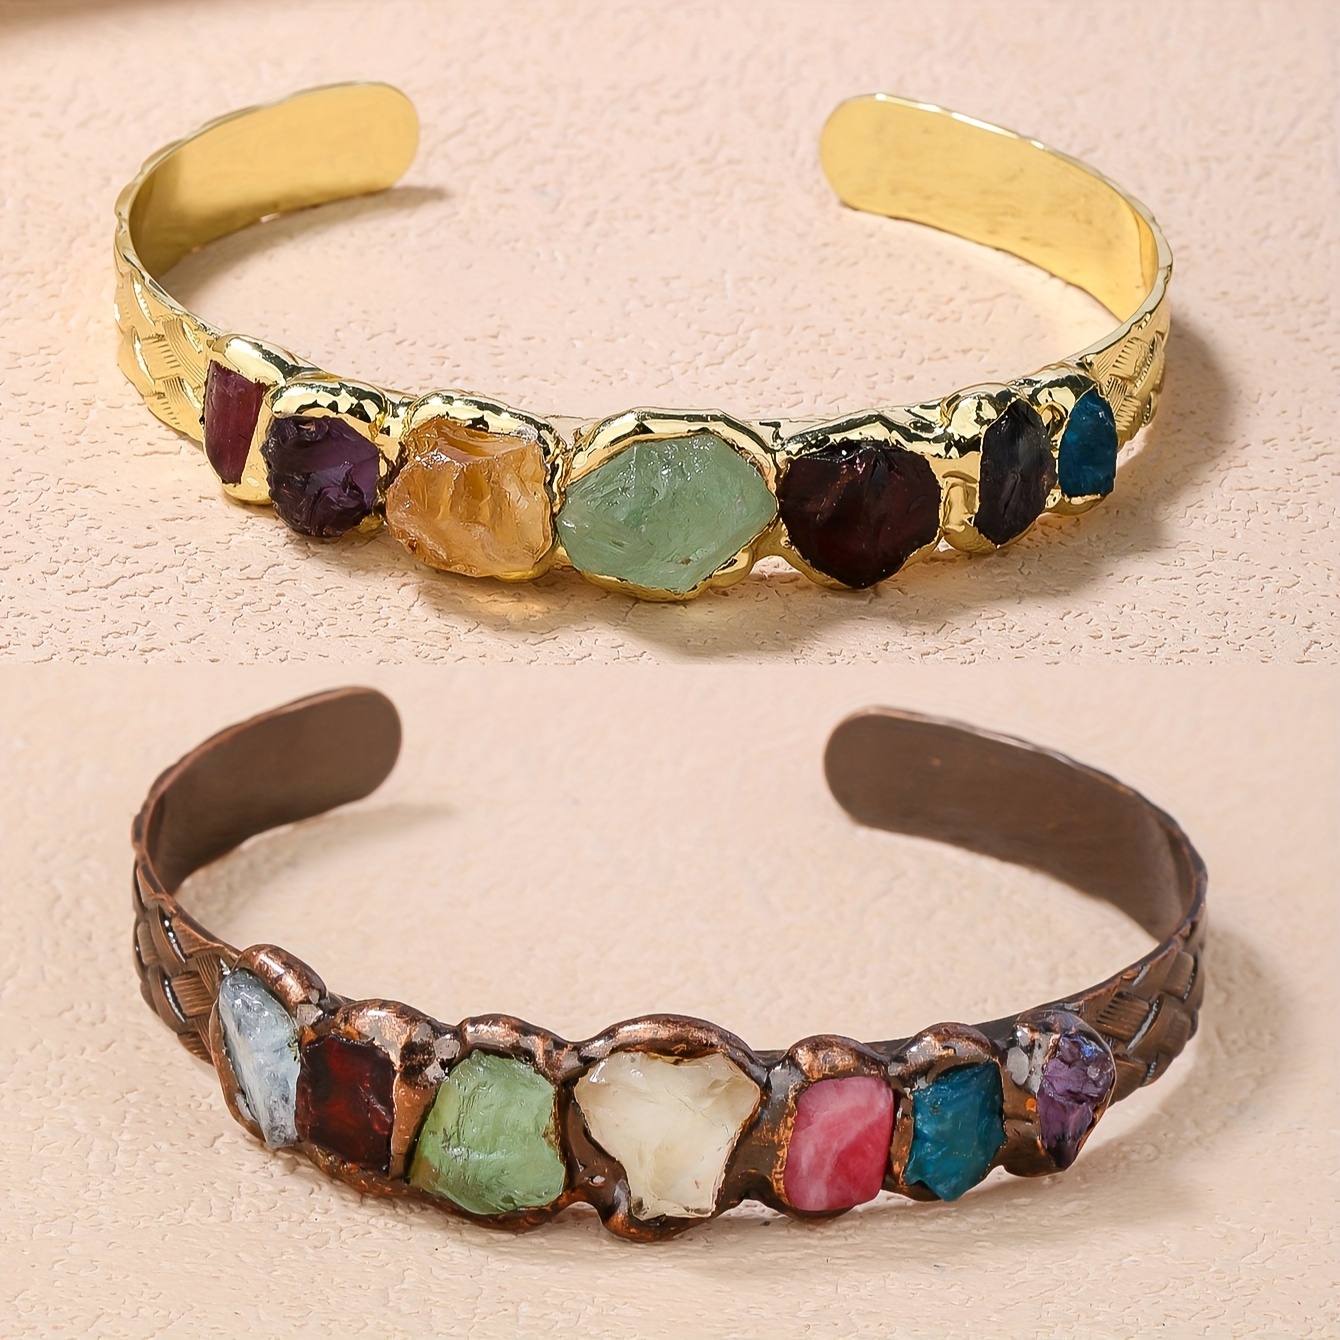 

Boho Vintage Copper Cuff Bracelet With 7 Natural Gemstones, Handcrafted Burnt Welded Design, Multi-colored Rock Crystal Mosaic, Summer Holiday Party Jewelry For Women - Mardi Gras Day Accessory